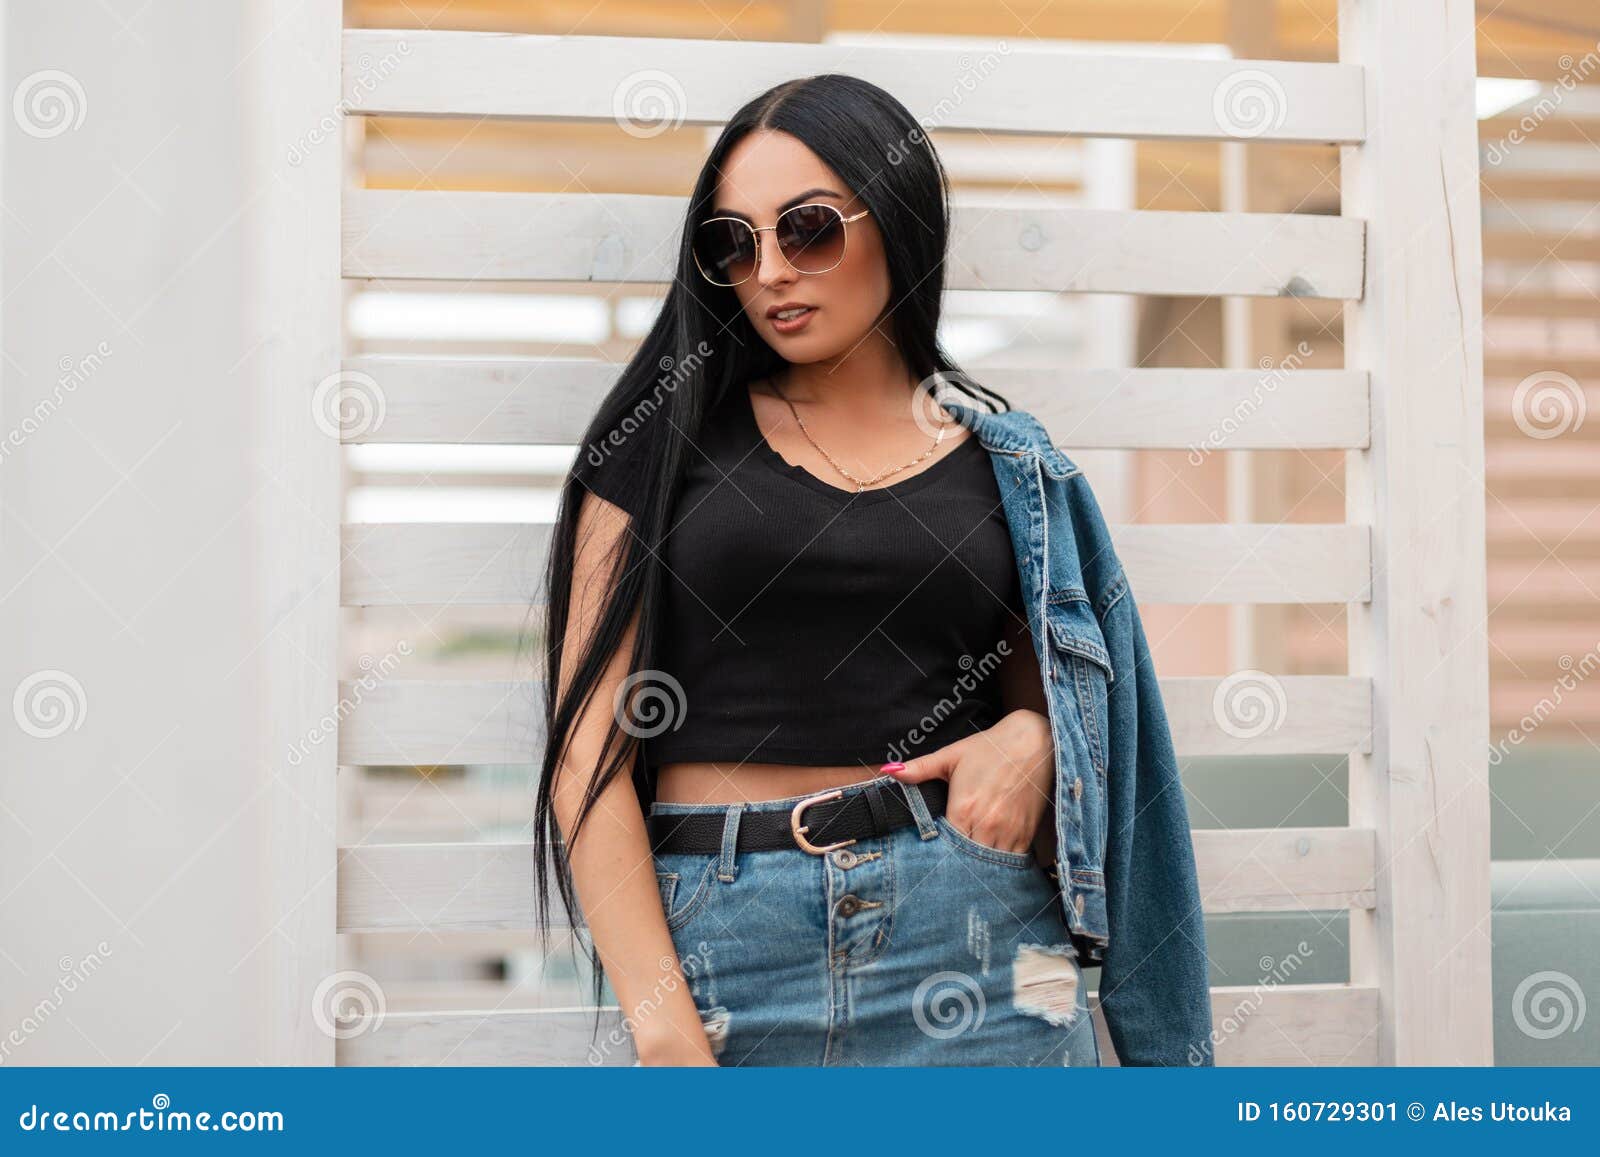 a young very beautiful woman in a black T-shirt denim jacket and